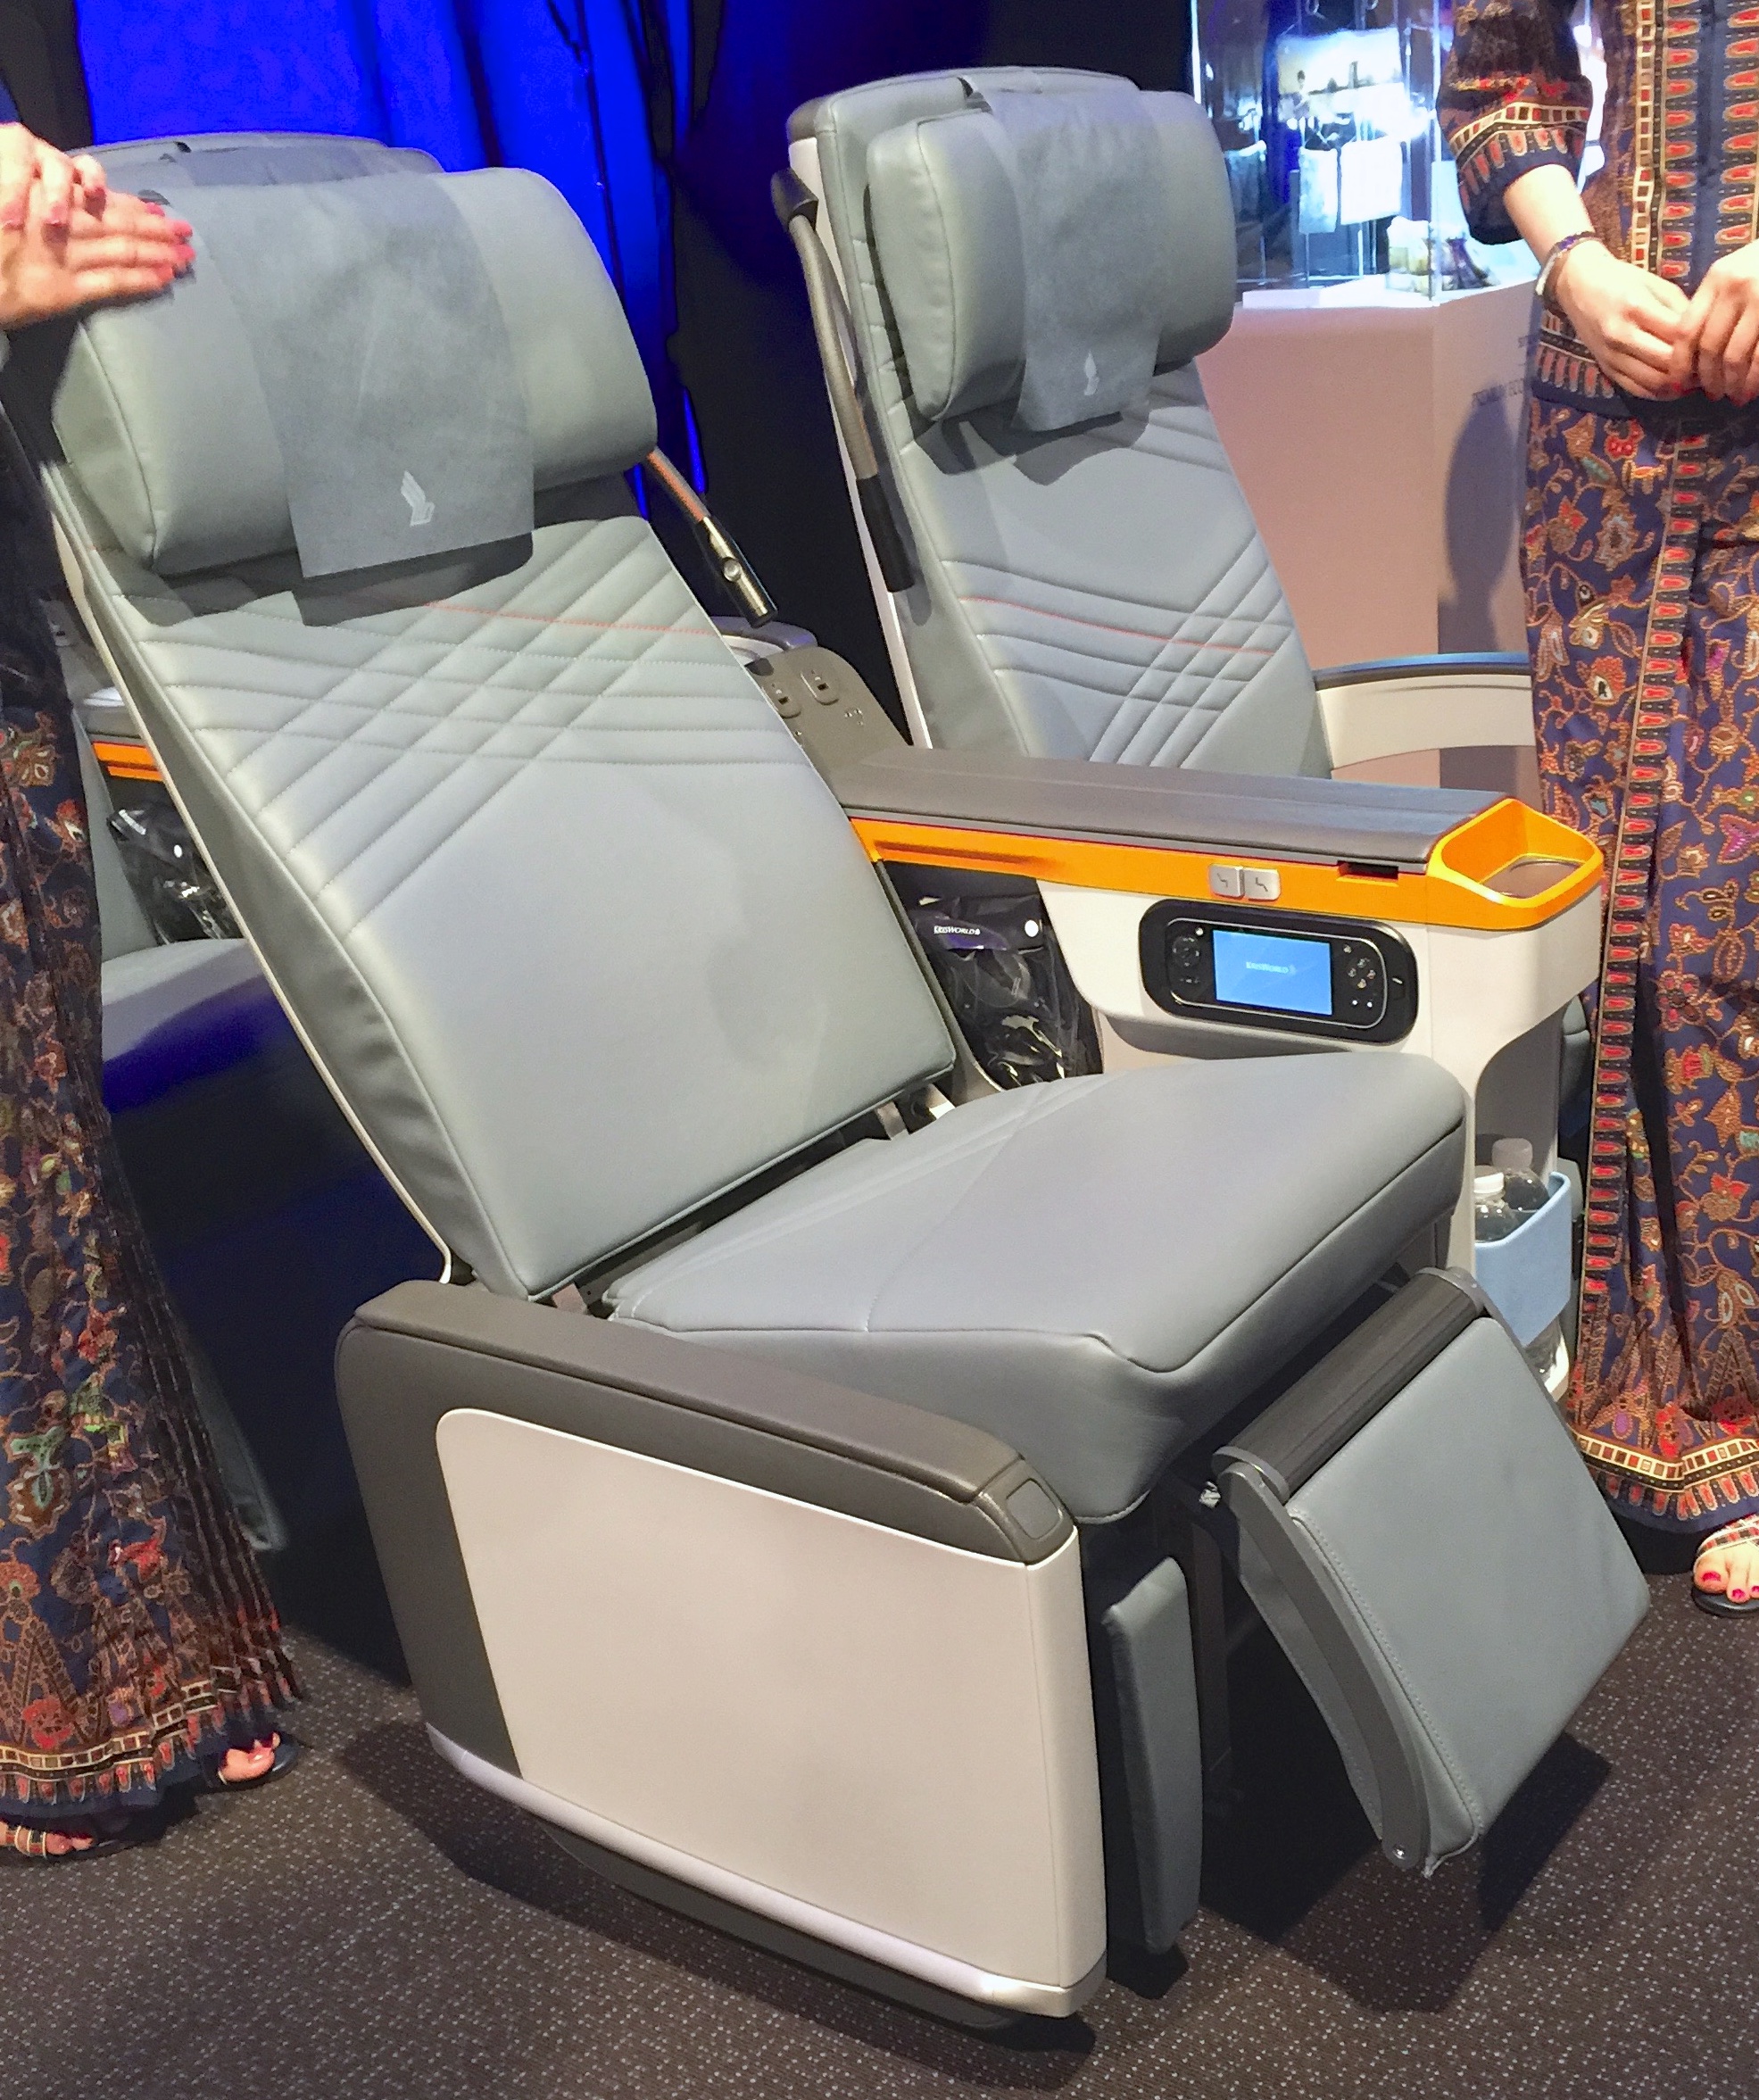 The outer armrest on Singapore Airlines' Premium Economy aisle seats can be lowered to make access easier and provided added seat width as needed/FCMedia